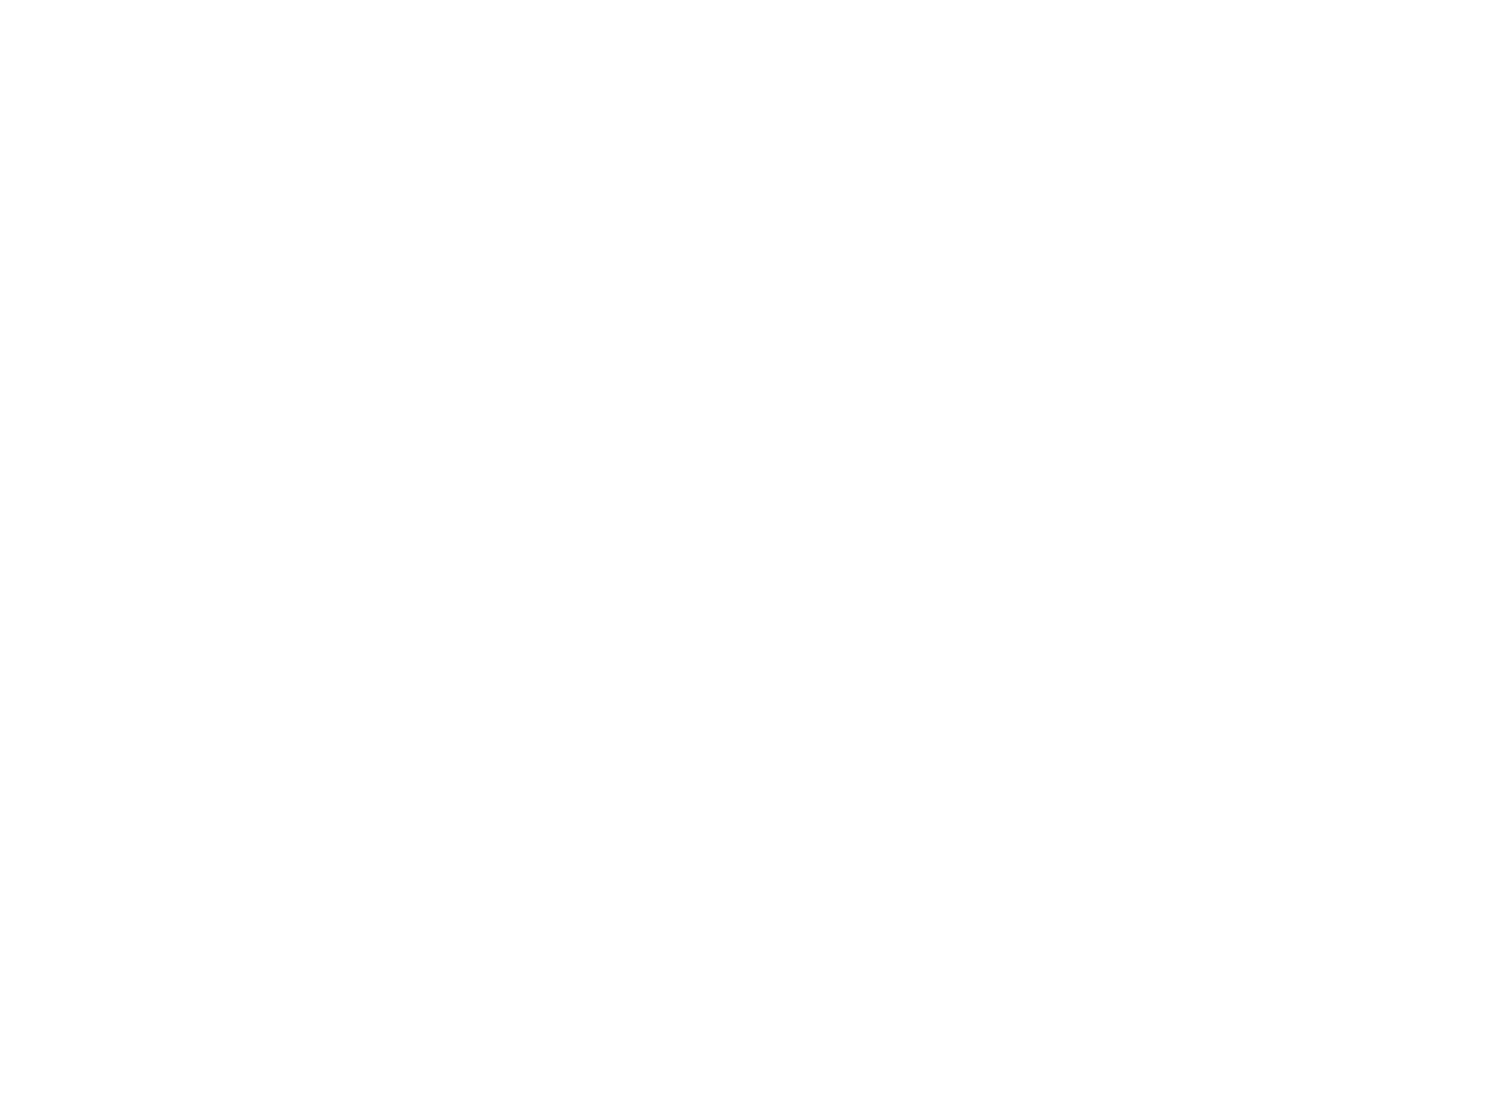 Home - Click. Post. Change.